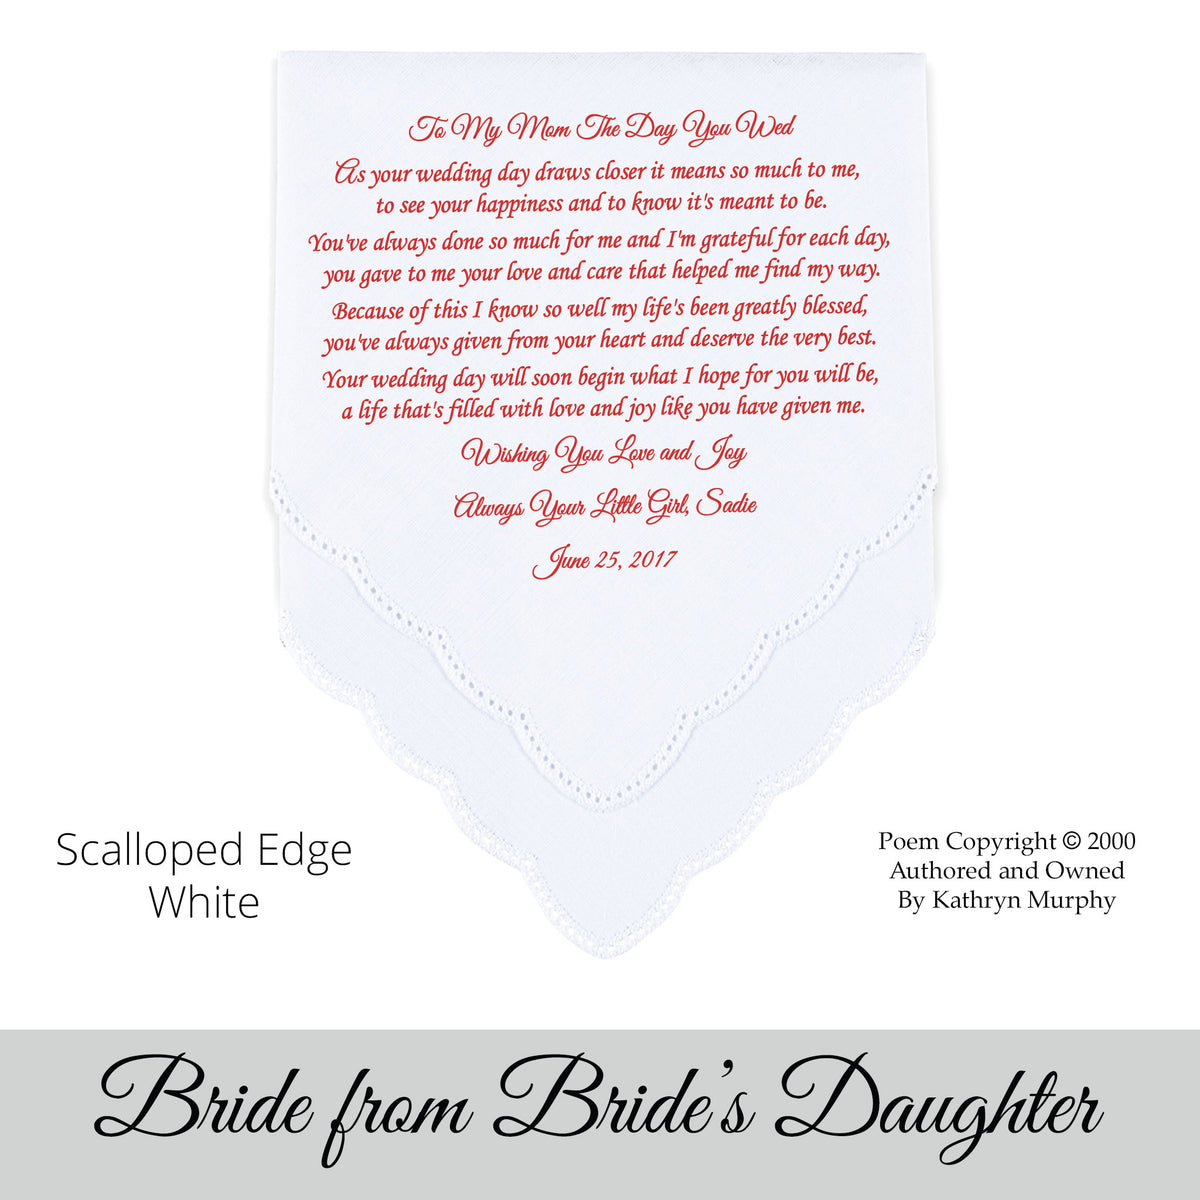 Gift for the Bride wedding hankie with the poem from her daughter or son